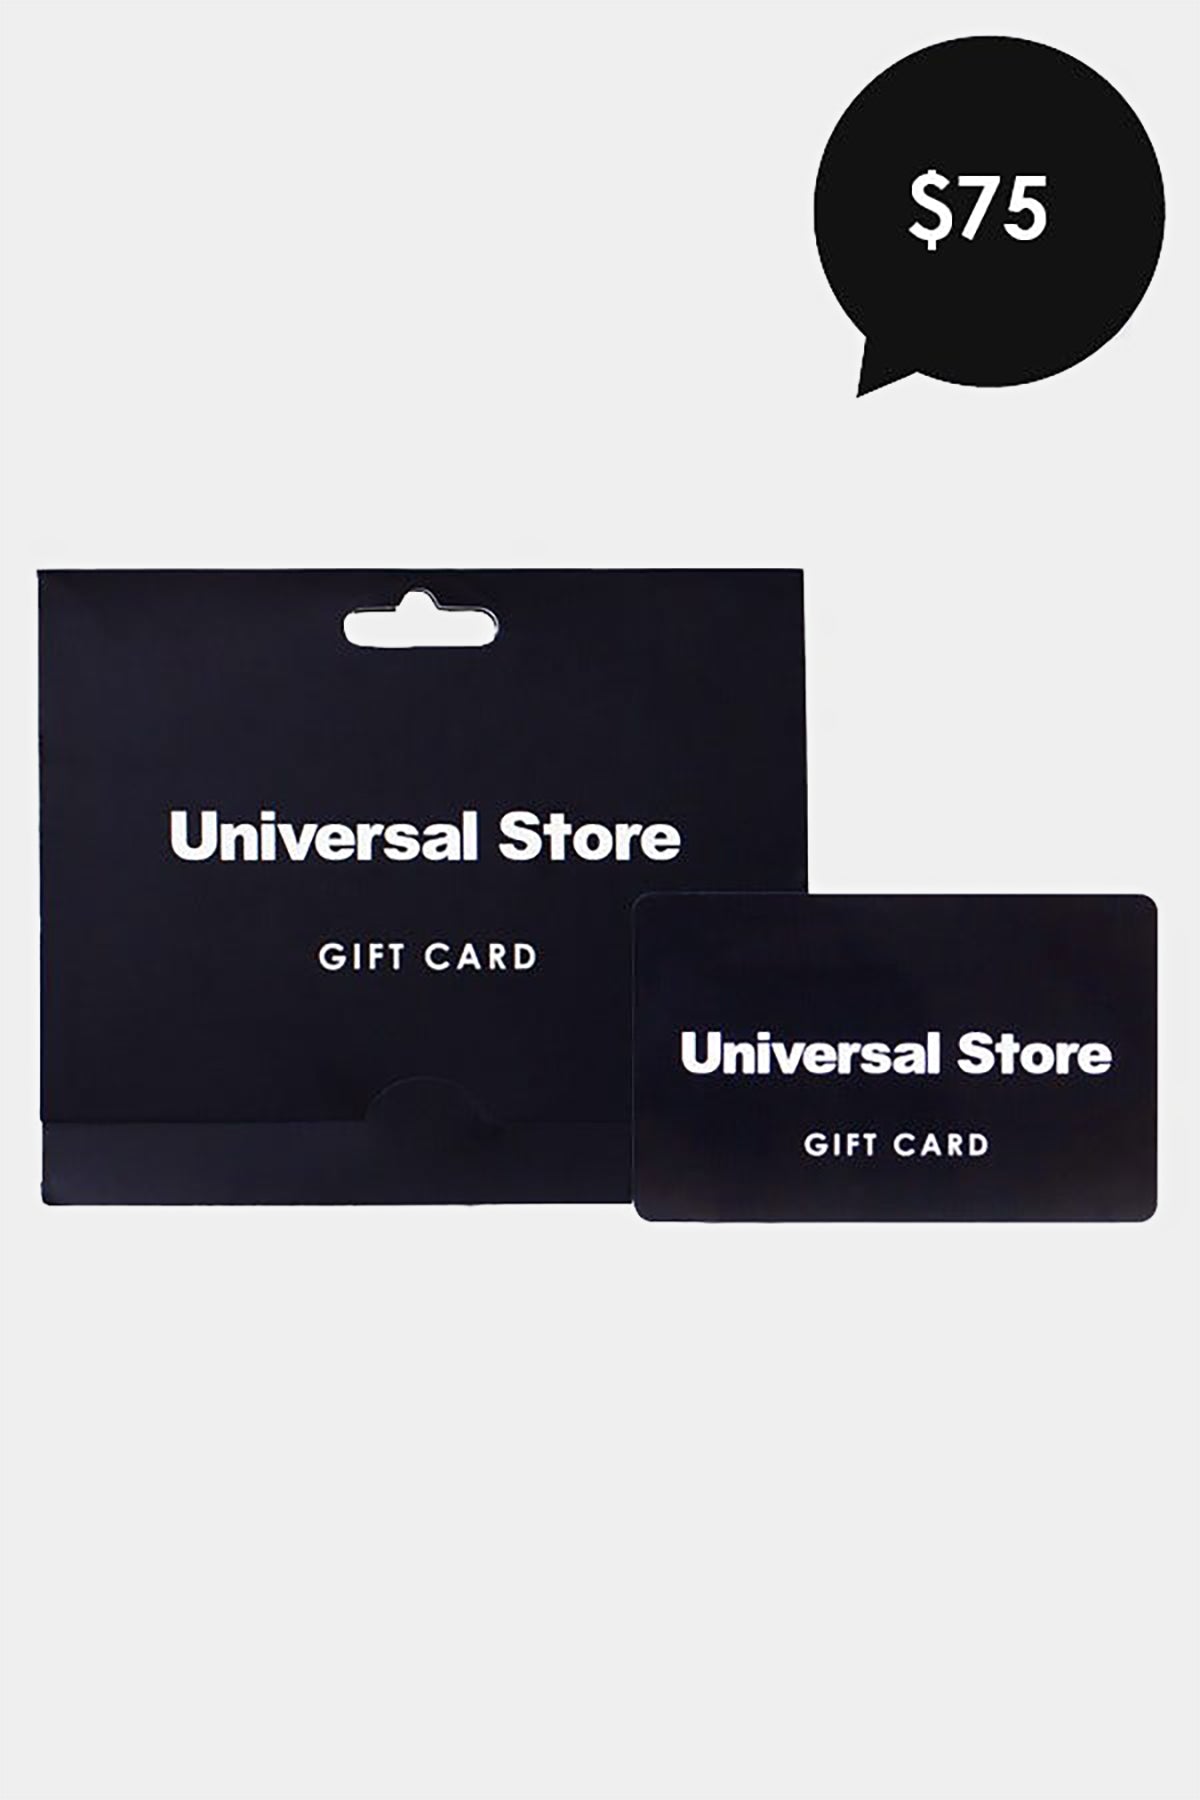 Universal Store $75 Gift Card